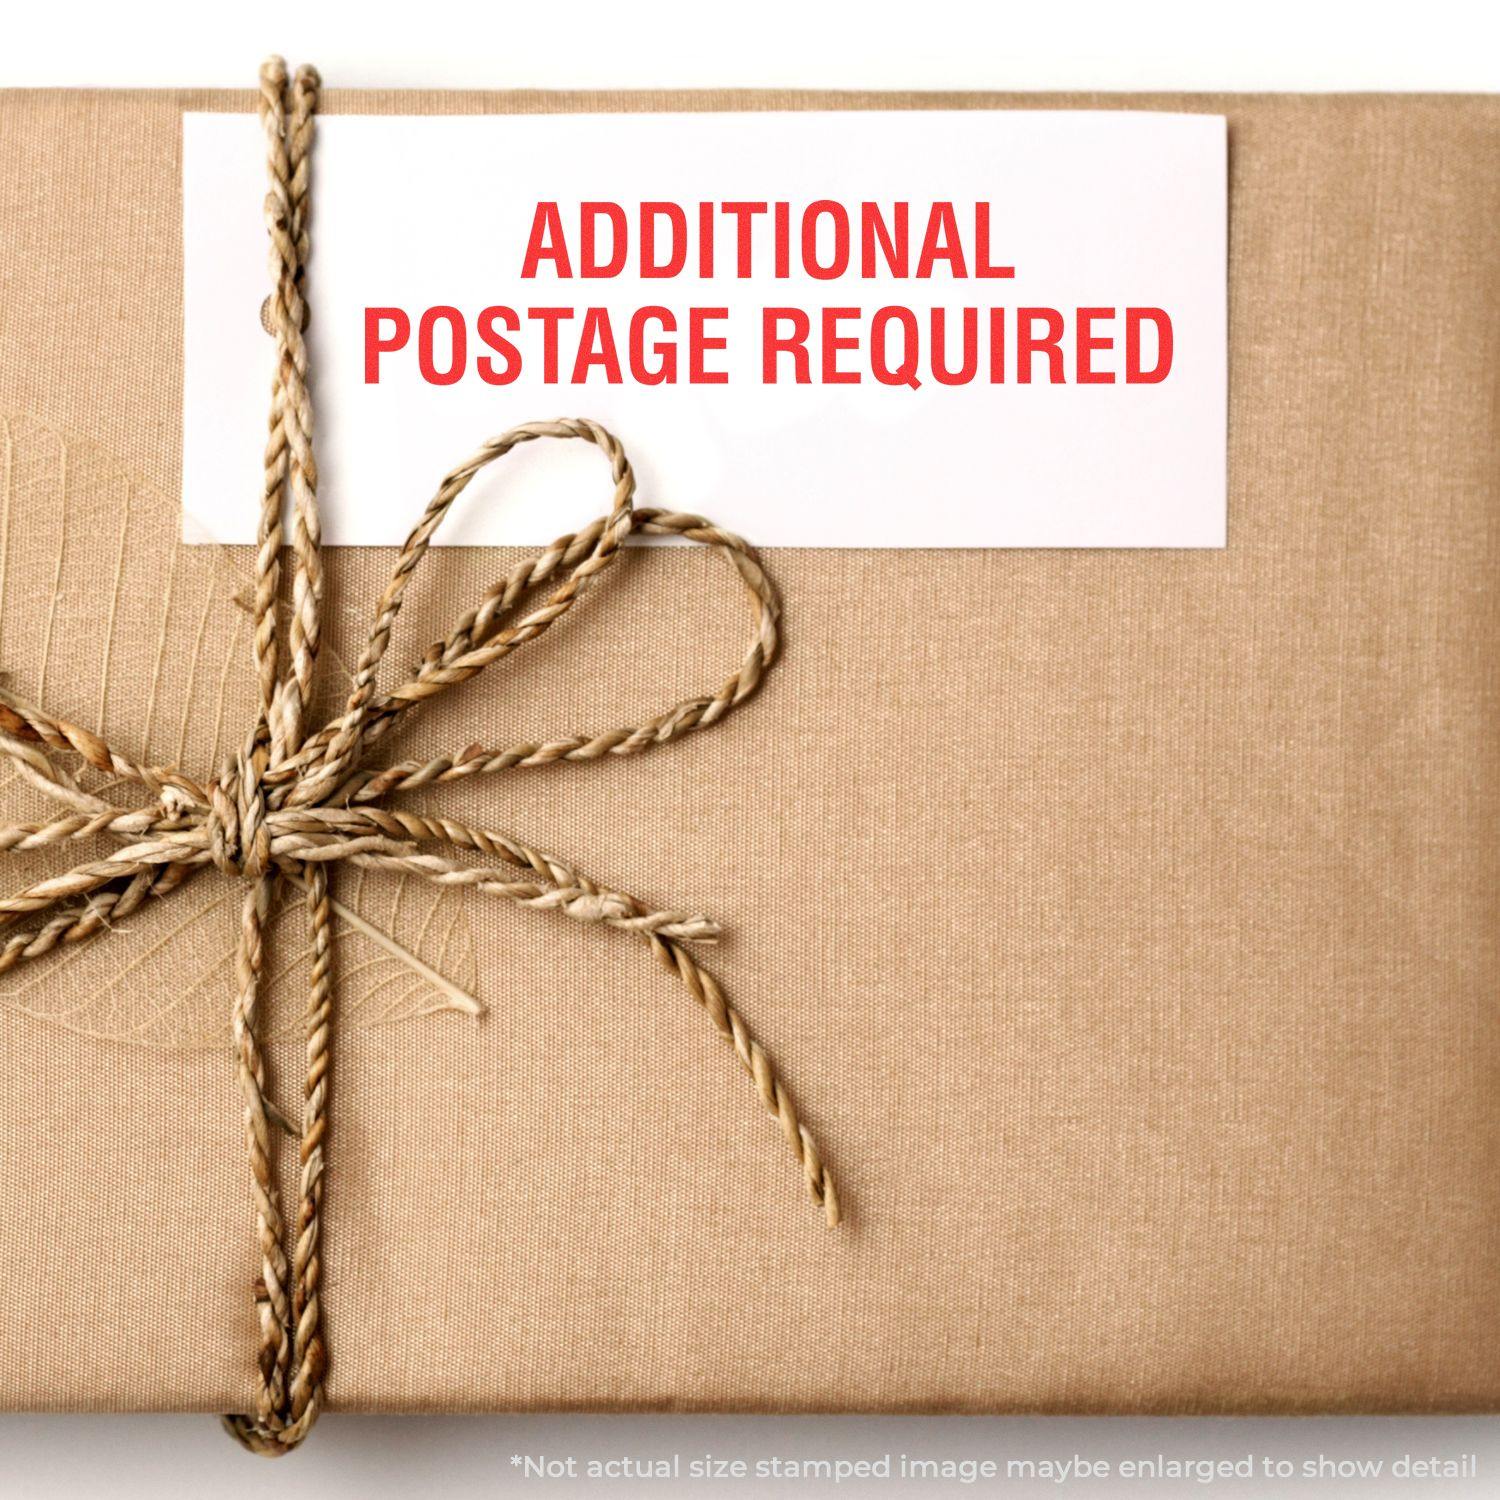 A self-inking stamp with a stamped image showing how the text "ADDITIONAL POSTAGE REQUIRED" in a large font is displayed by it after stamping.